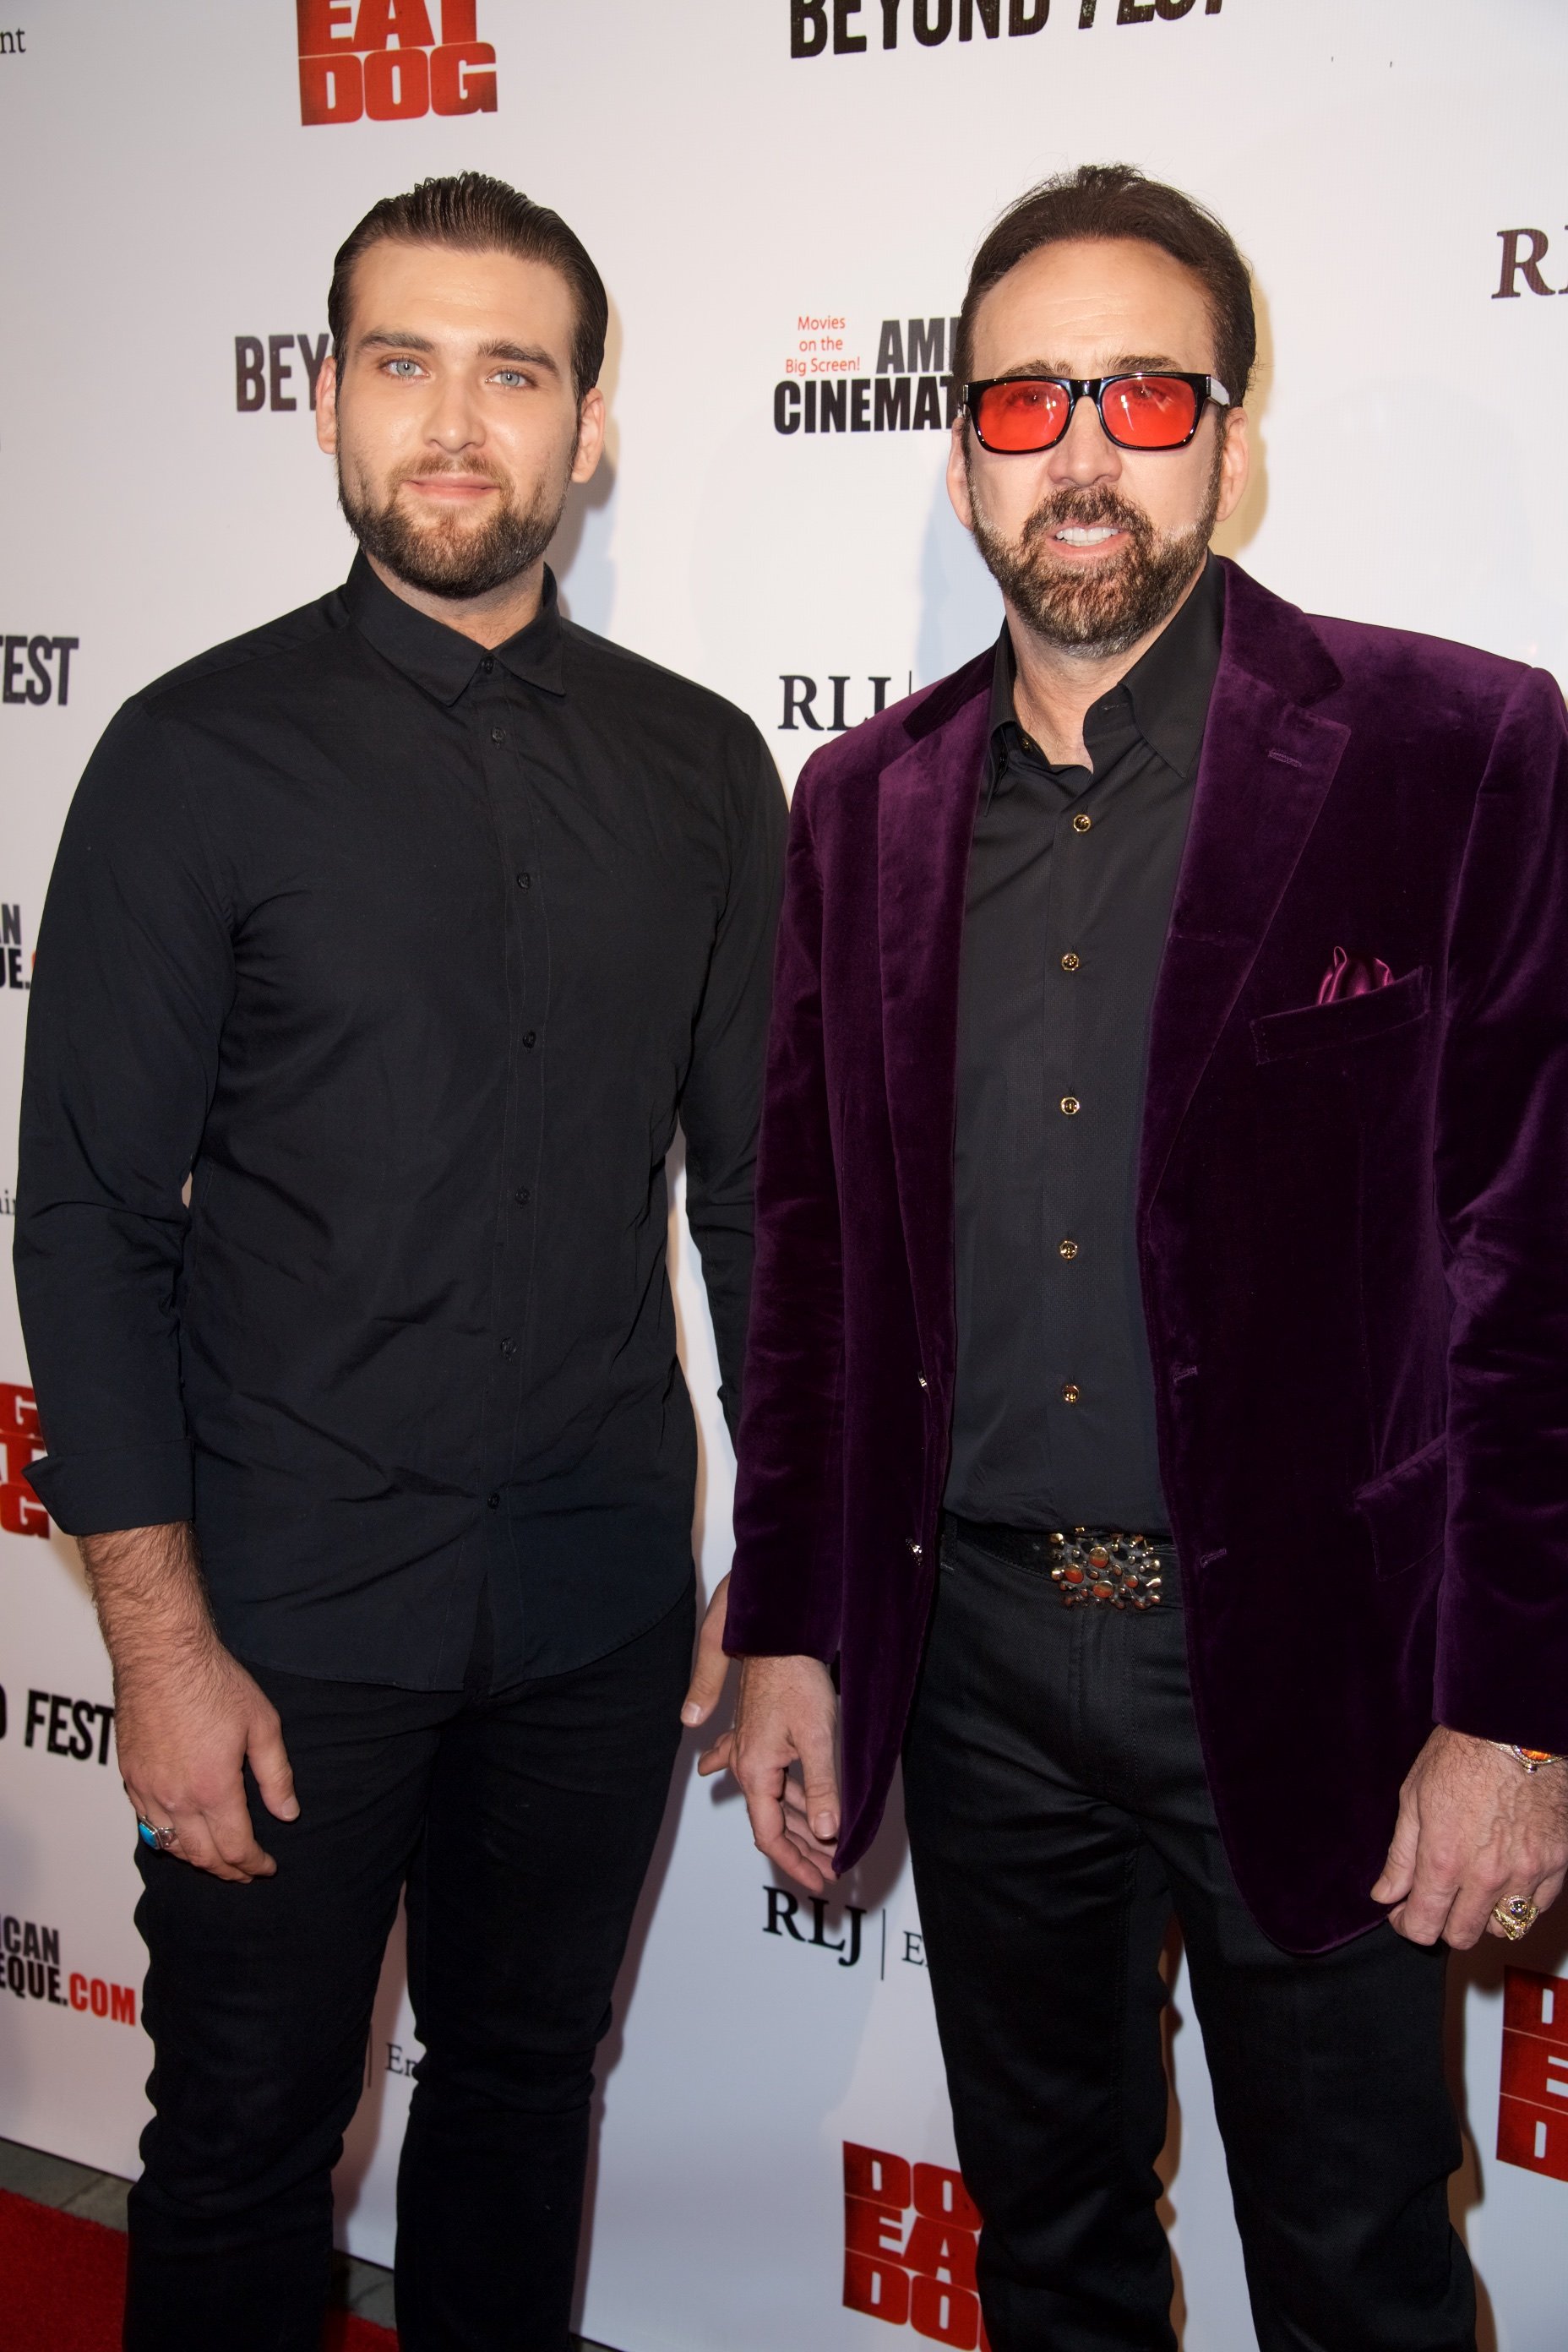 Weston Cage and Nicholas Cage attend the Premiere of RLJ Entertainment's "Dog Eat Dog" at The Egyptian Theatre on September 30, 2016, in Los Angeles, California. | Source: Getty Images.